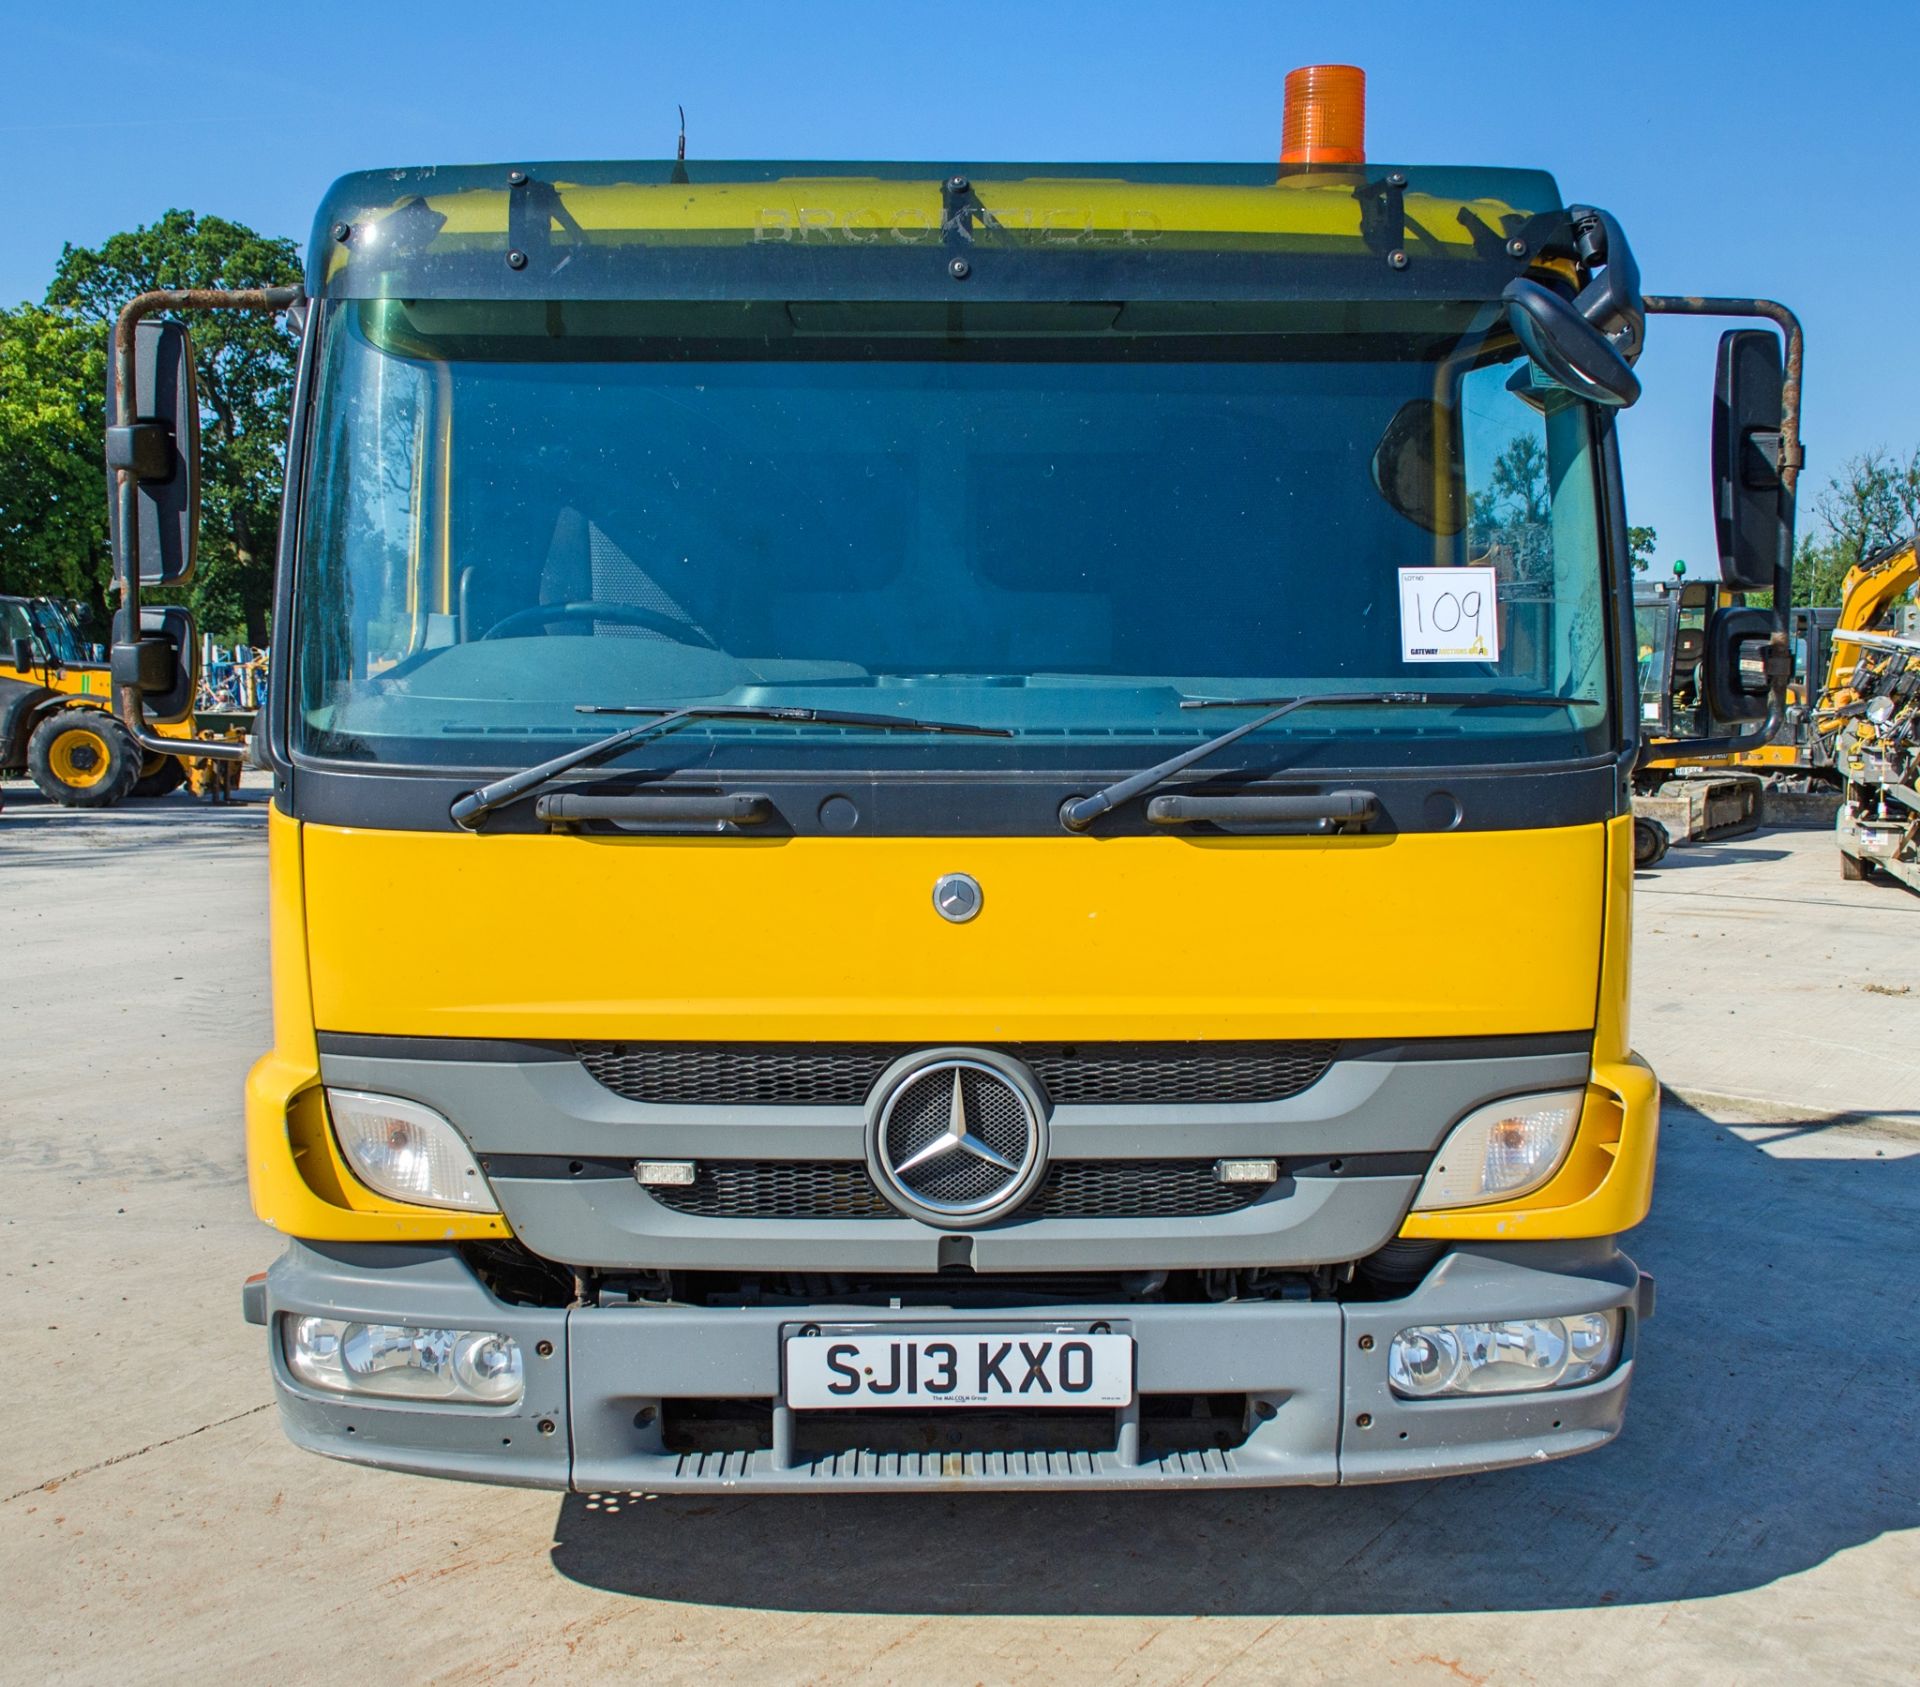 Mercedes Benz Atego 7.5 tonne 4x2 tipper lorry Reg no: SJ13 KXO Date of registration: Recorded - Image 5 of 28